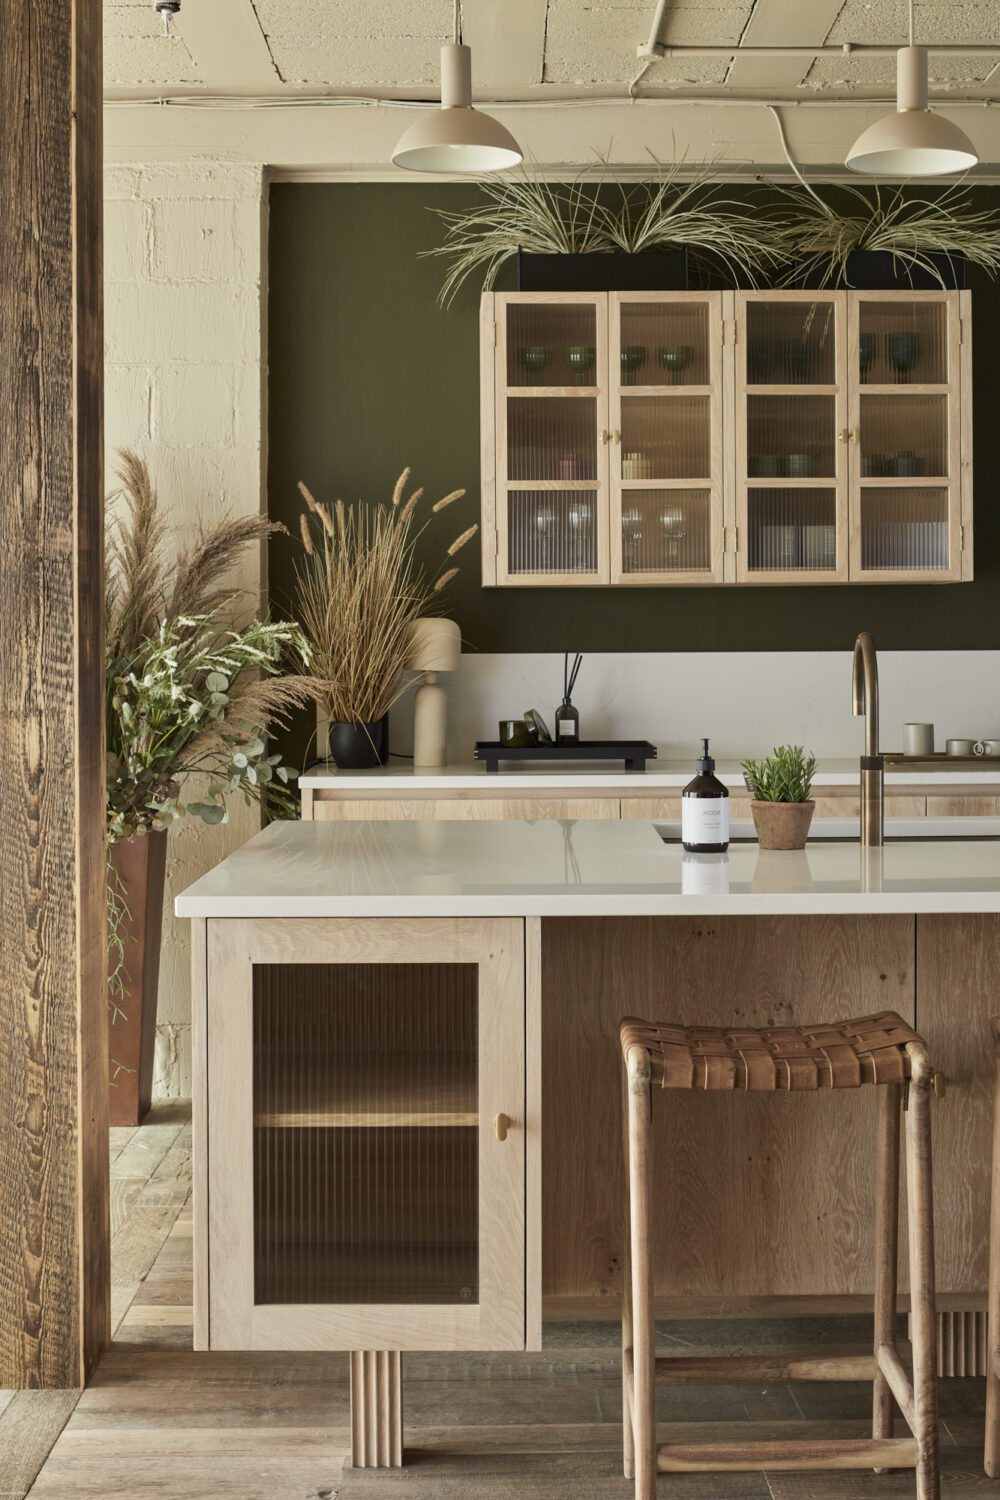 collaboration display kitchen located in London